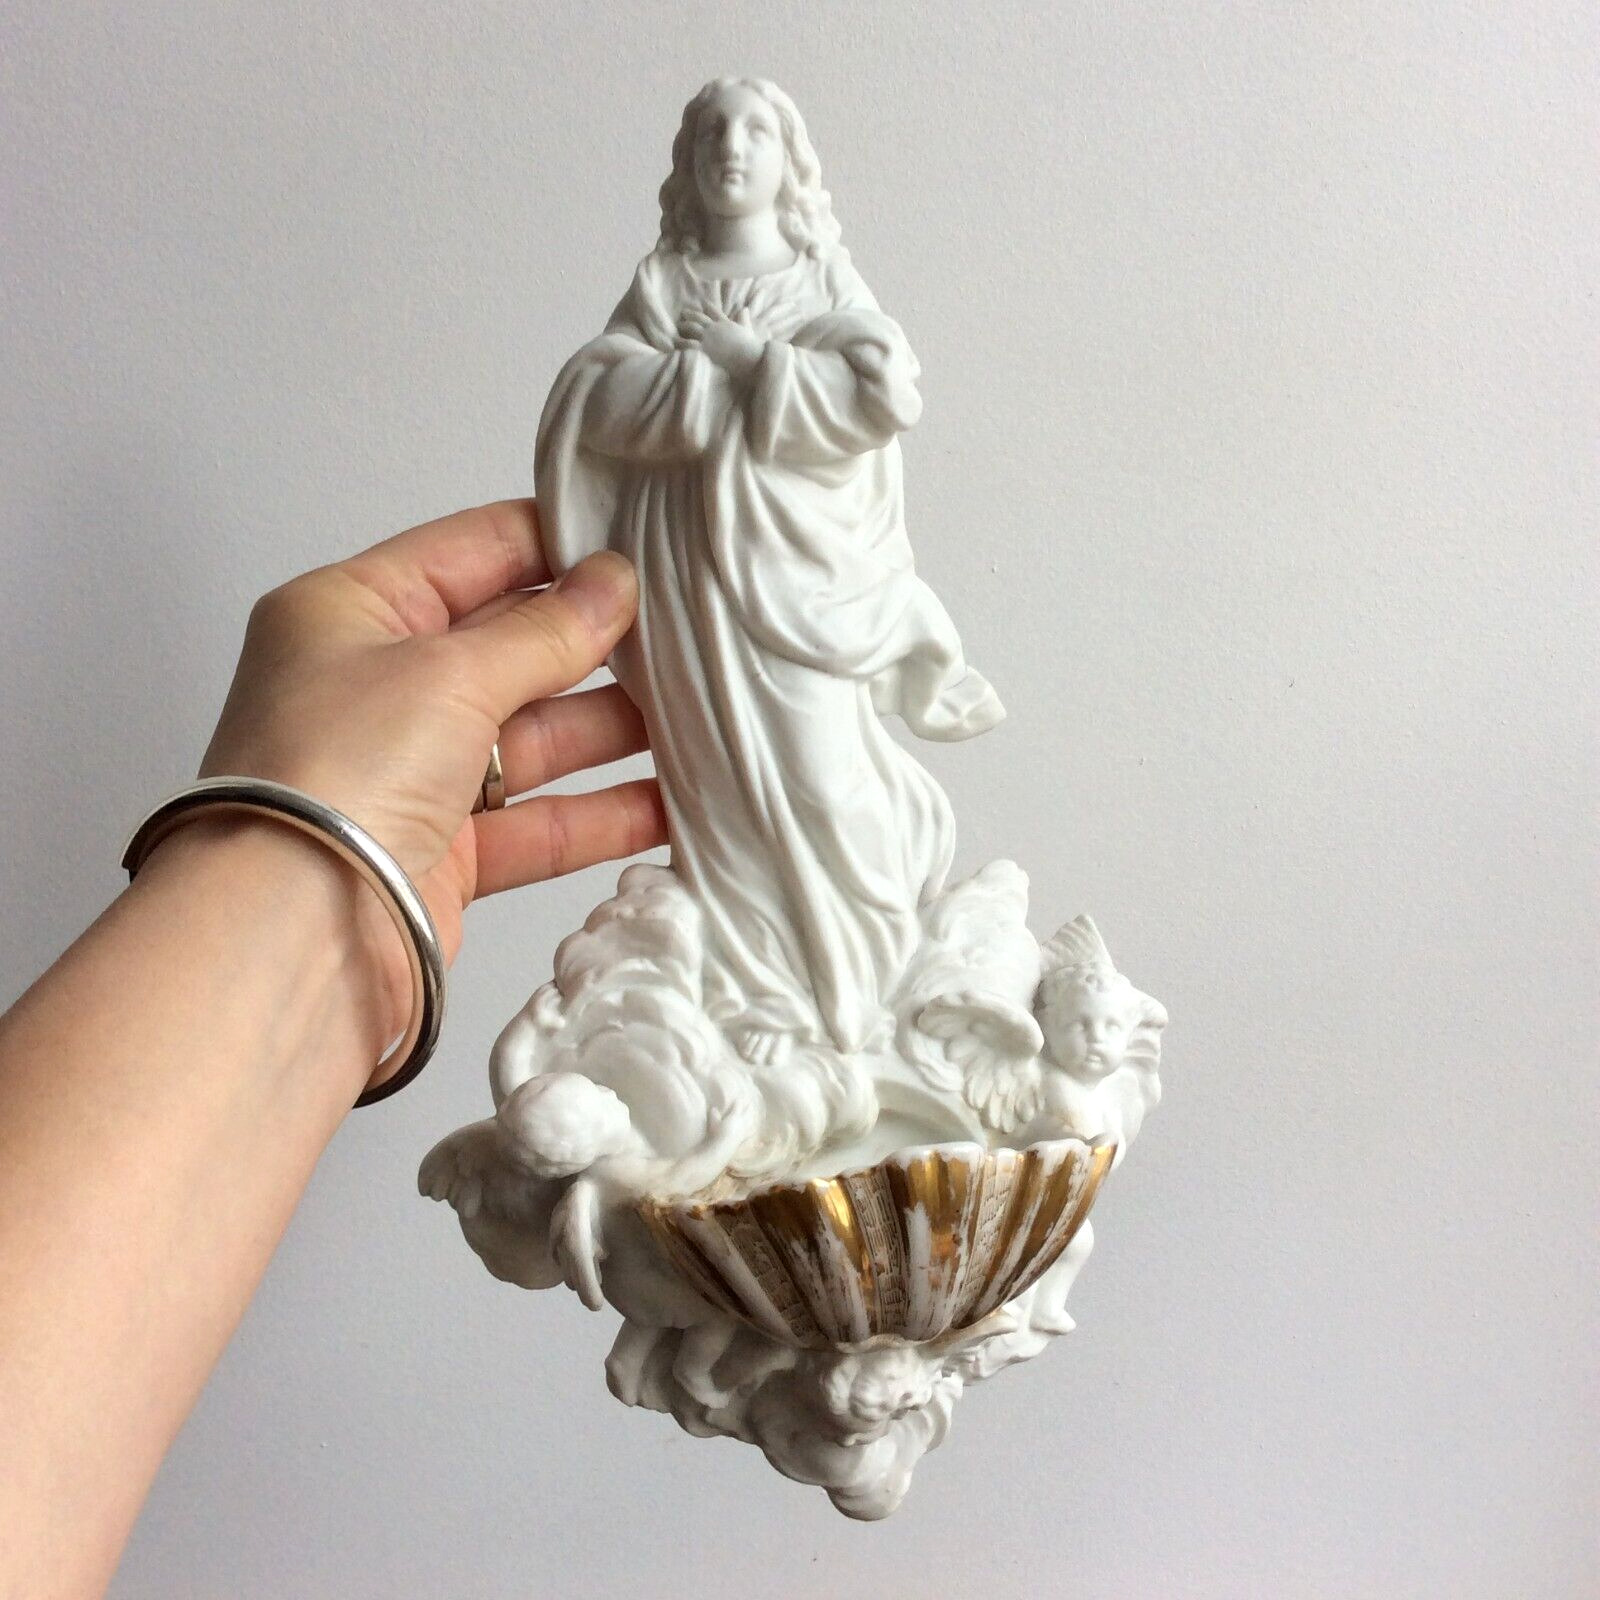 Old Porcelain Stoup Biscuit Virgin Mary Angels 19th Century - Devotion Religion